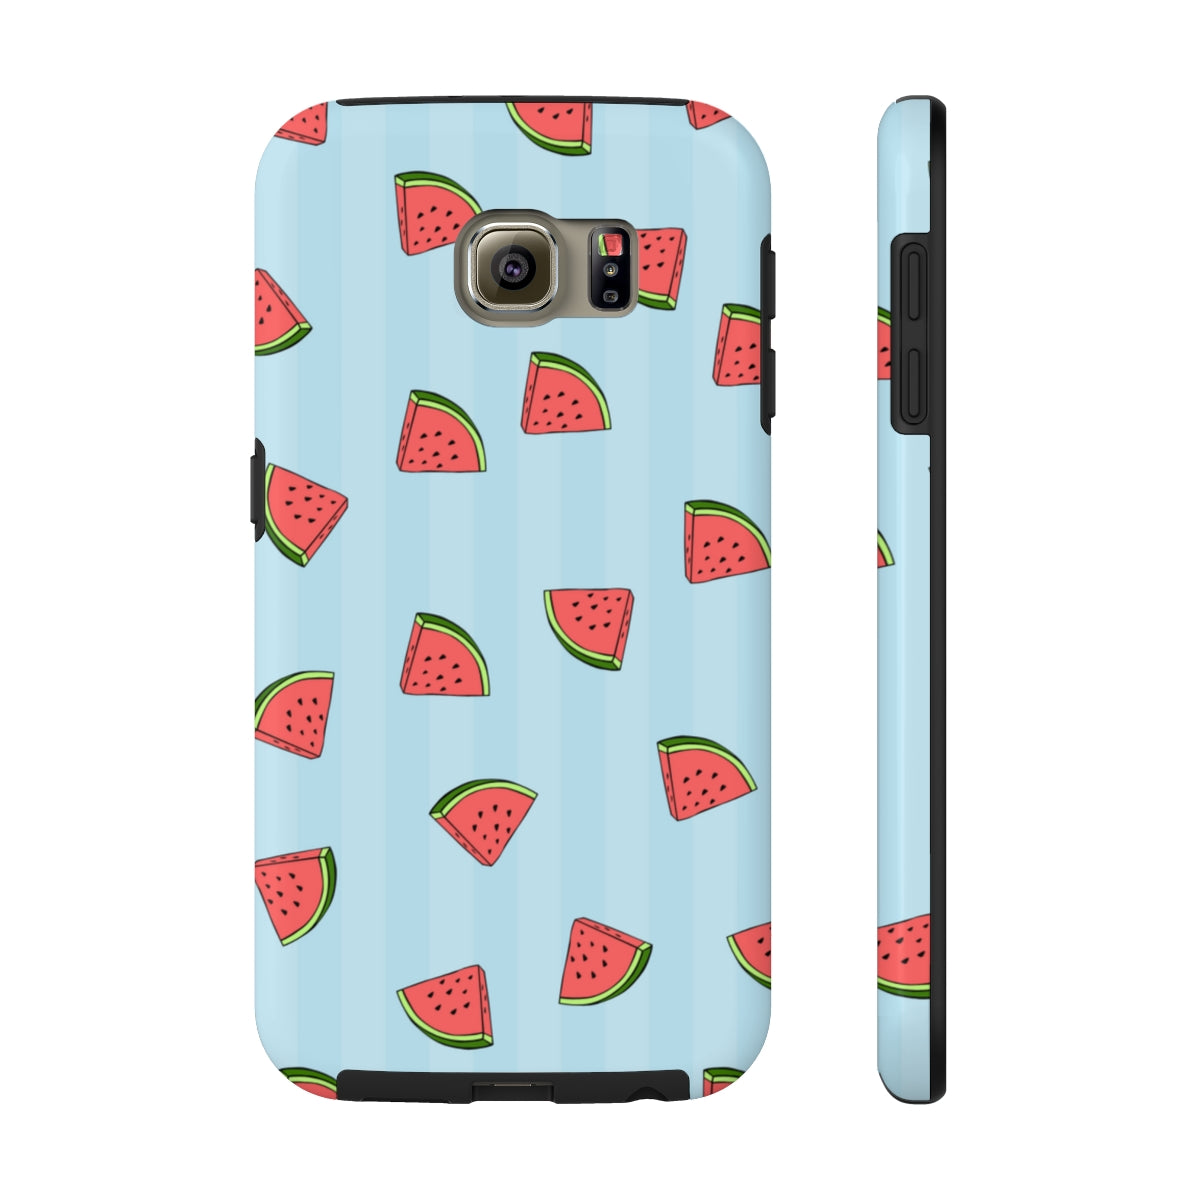 (iPHONE 5 TO XR) Watermelon Pattern Tough Phone Cases